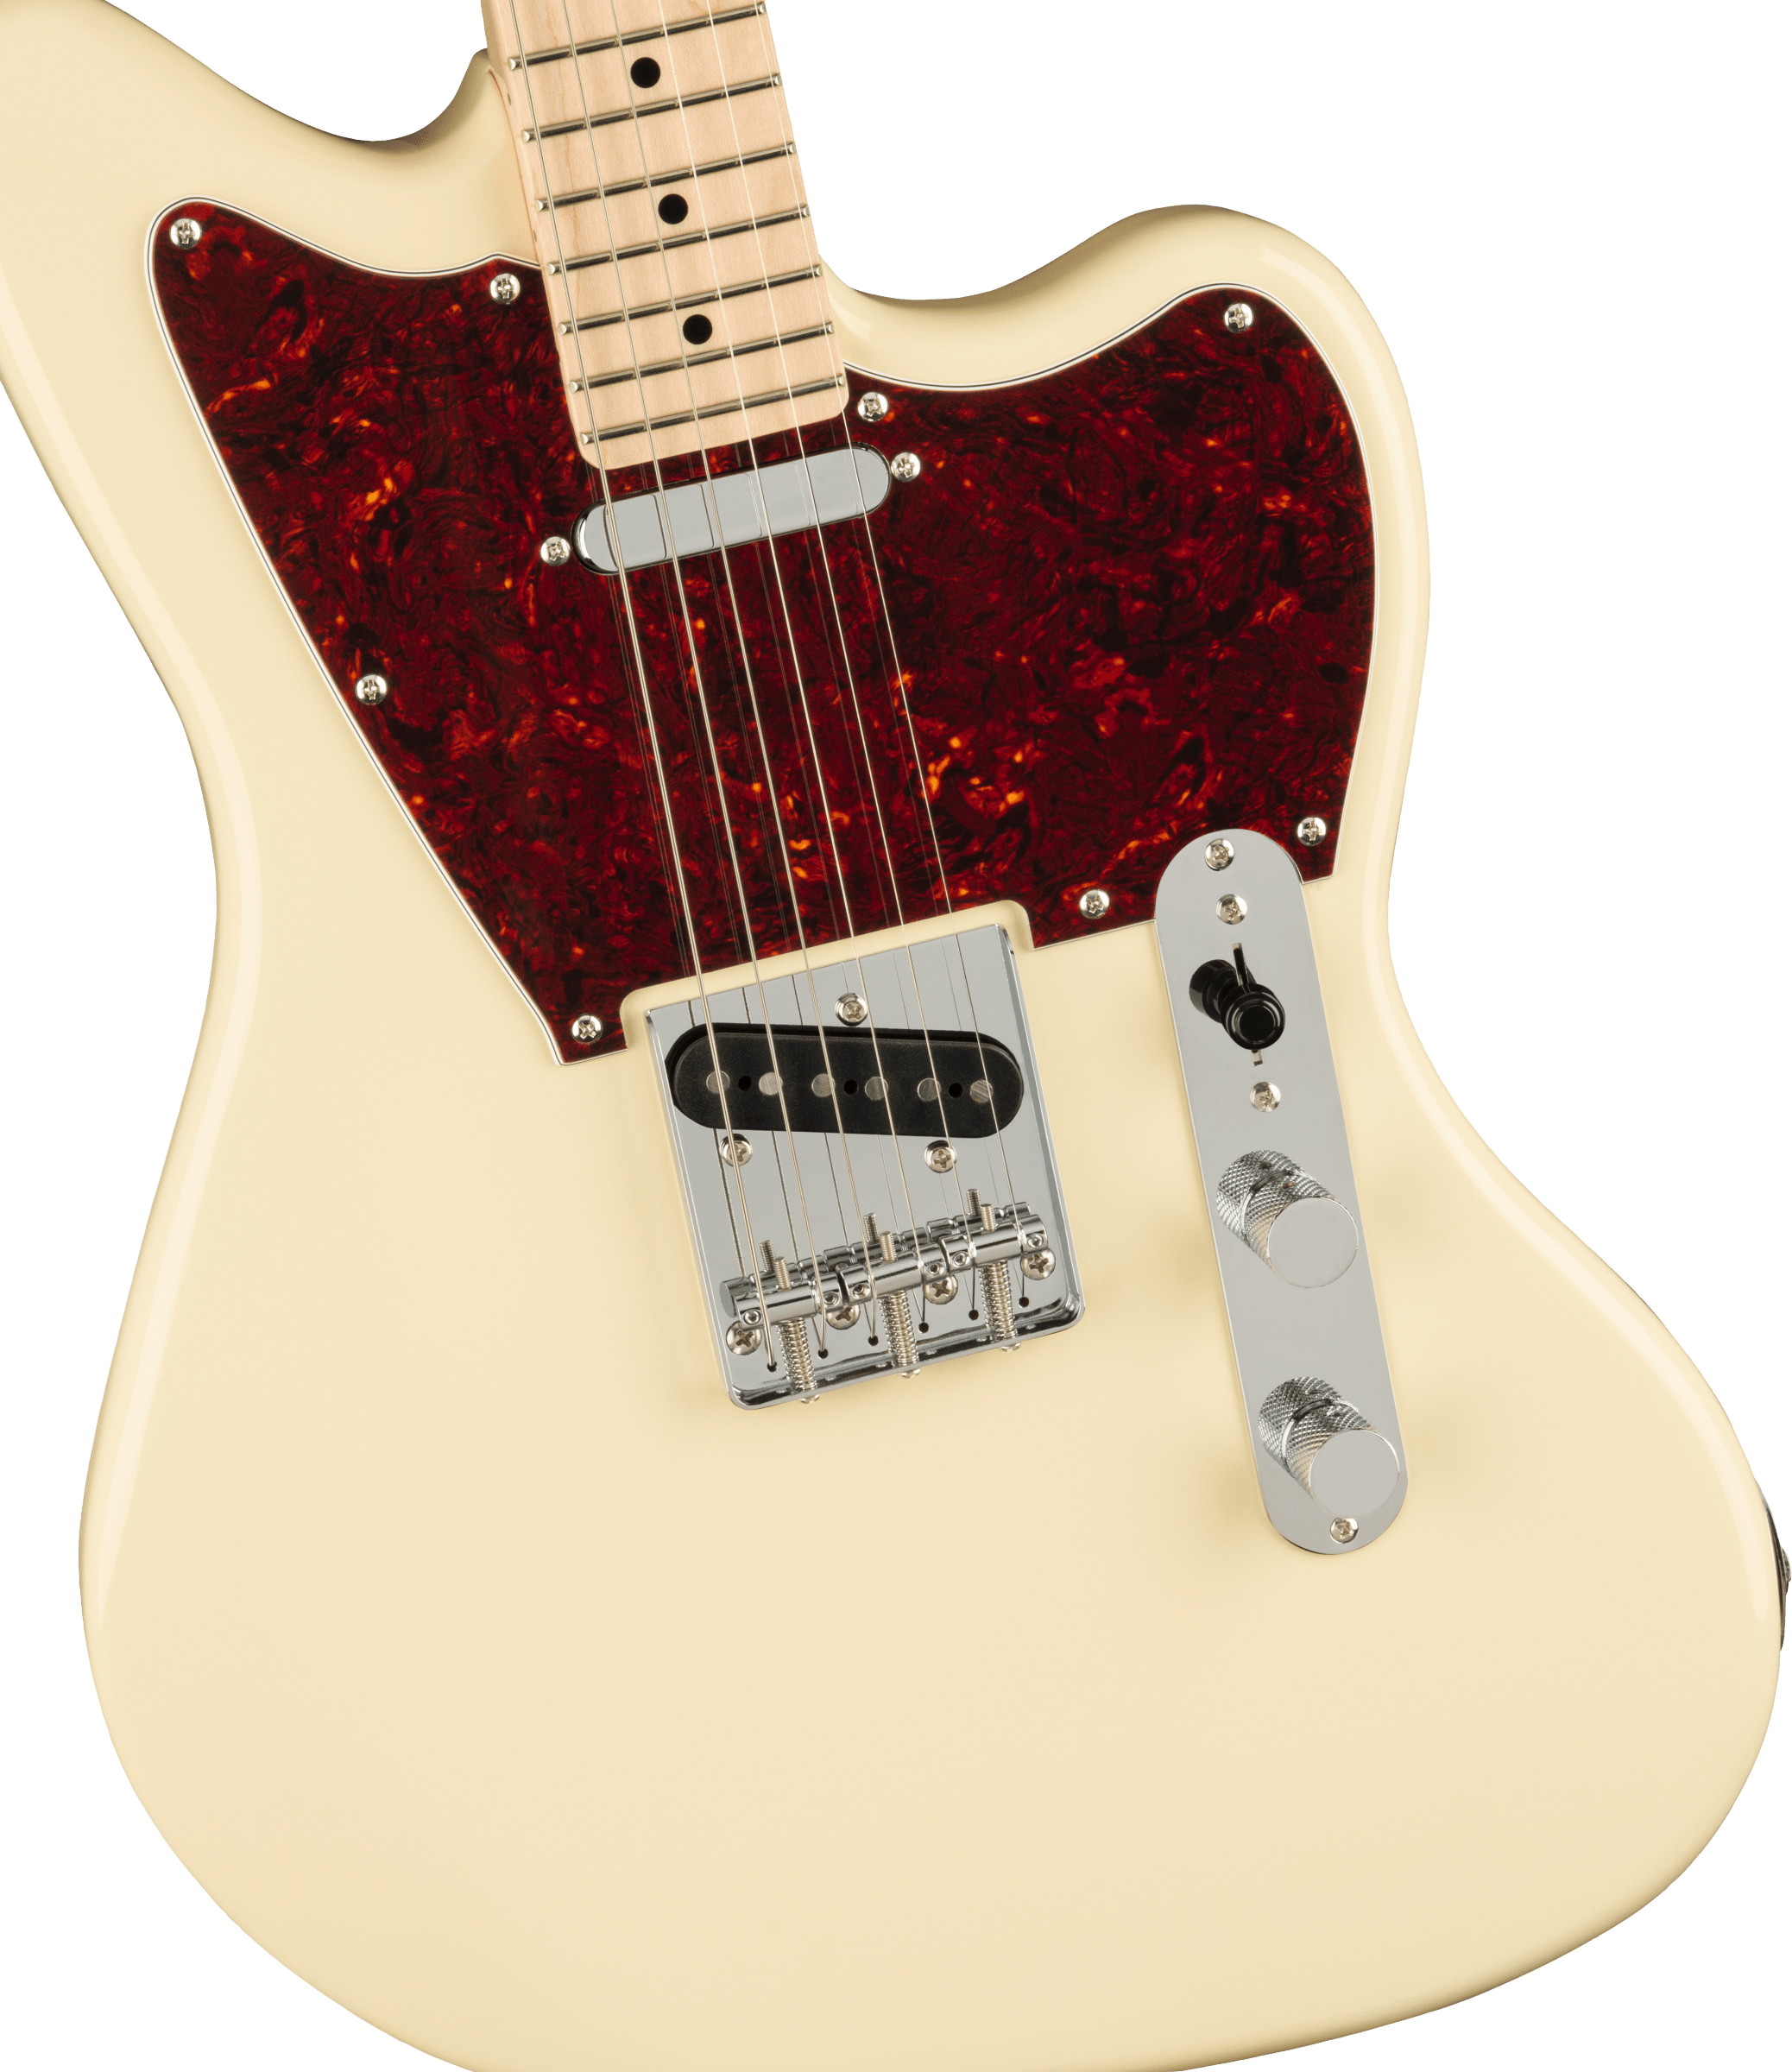 Squier Tele Offset Paranormal Ss Ht Mn - Olympic White - Guitarra electrica retro rock - Variation 2